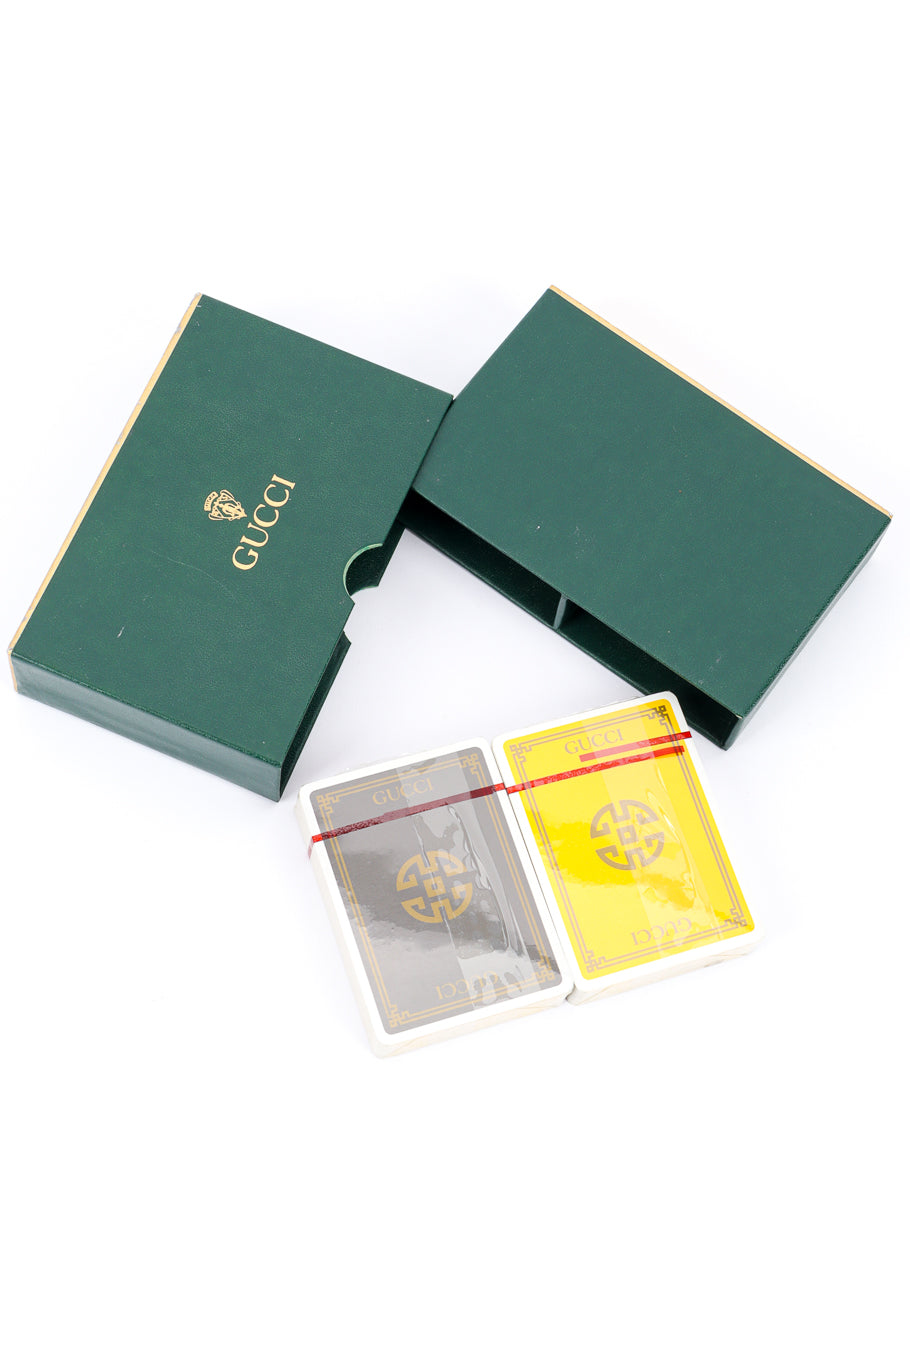 Vintage Gucci Yellow and Grey 2 Deck Playing Card Set front open box @recessla